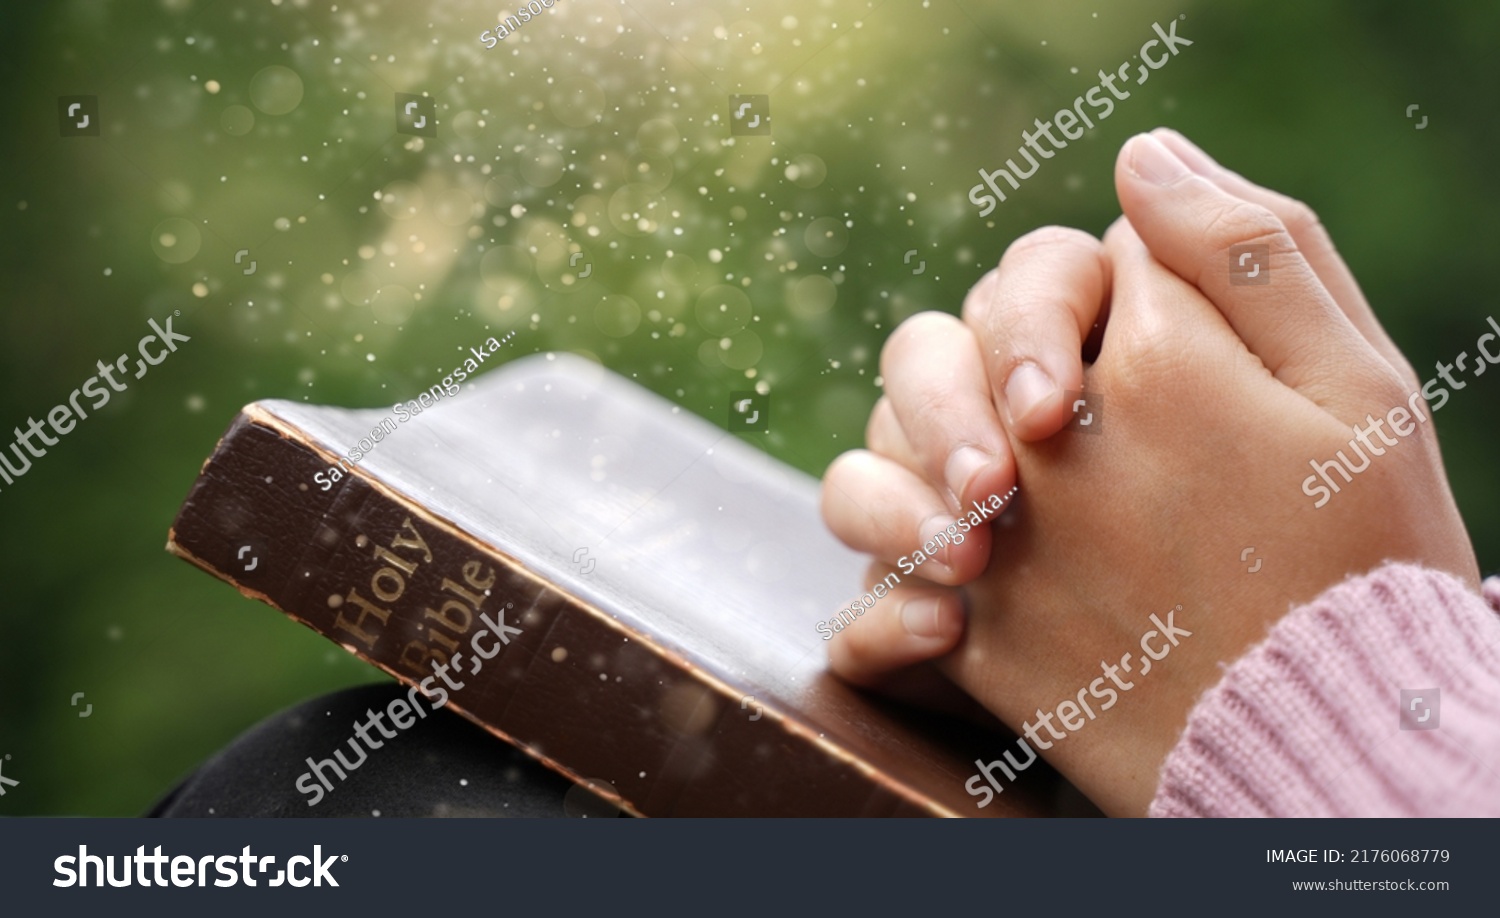 Christian Crisis Prayer to God Man praying to God for a better life human hands praying to god with bible believe in good Hold hands and pray. #2176068779